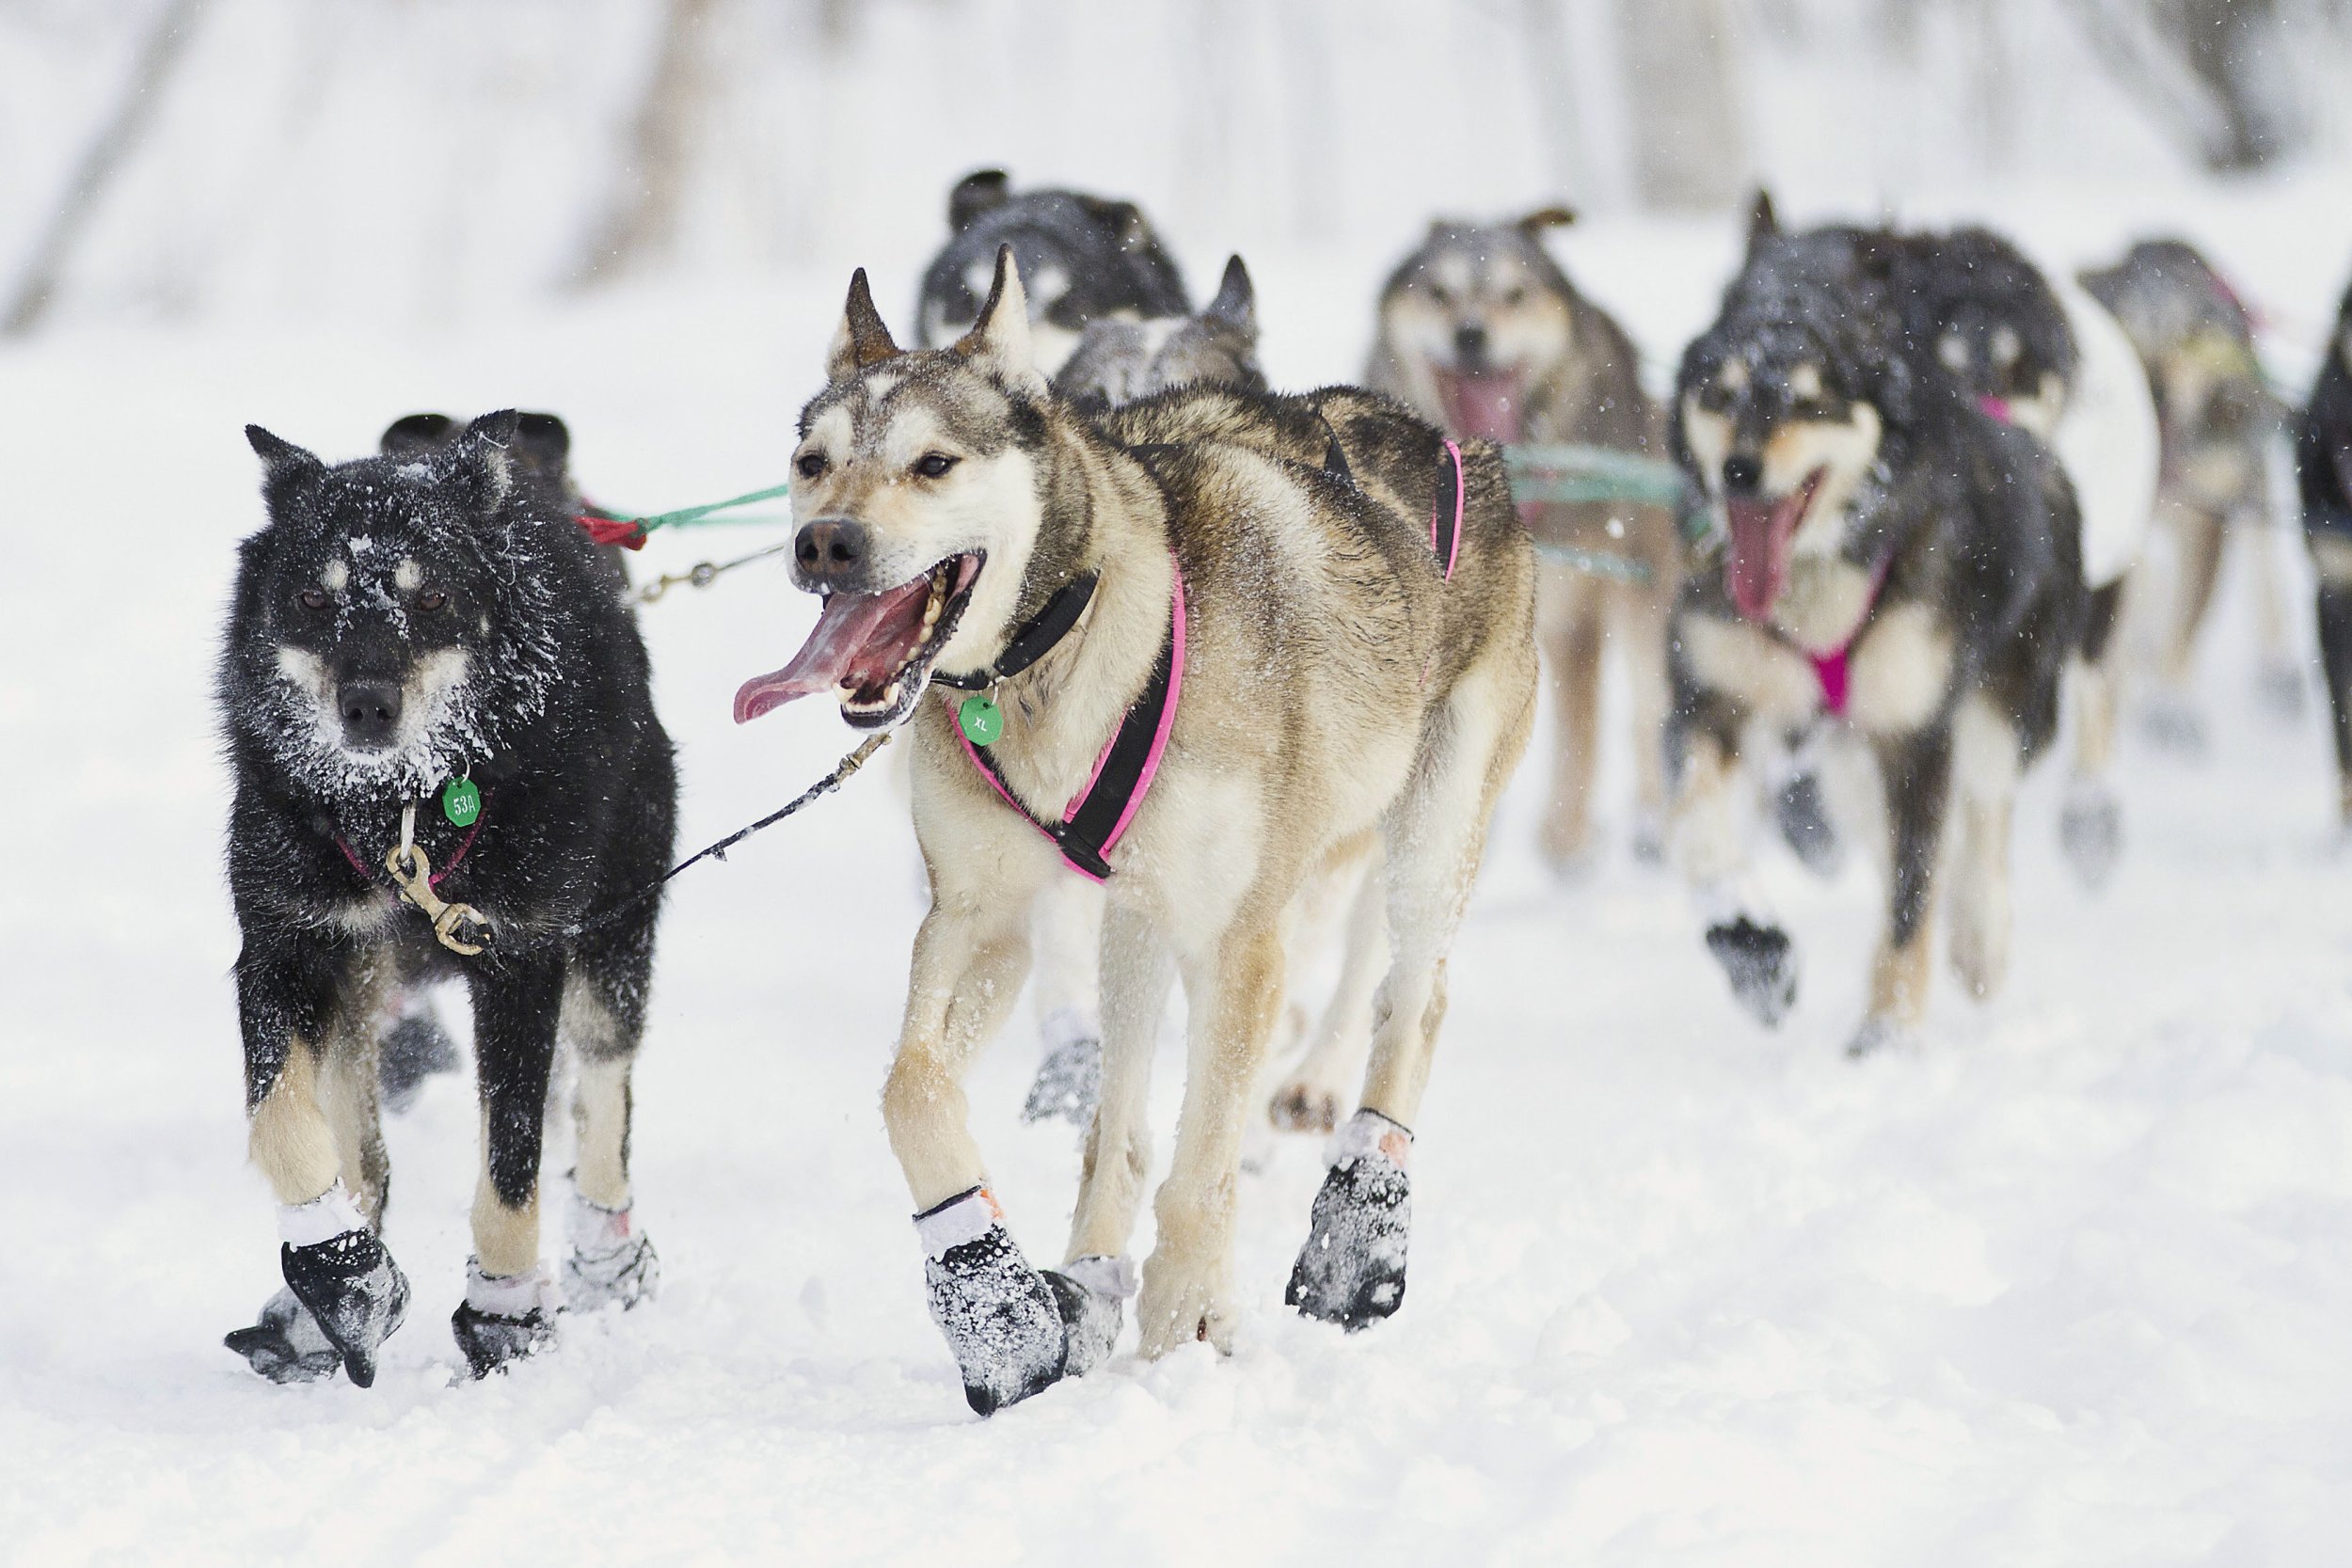 Zoya DeNure sled dogs during the 40th Iditarod